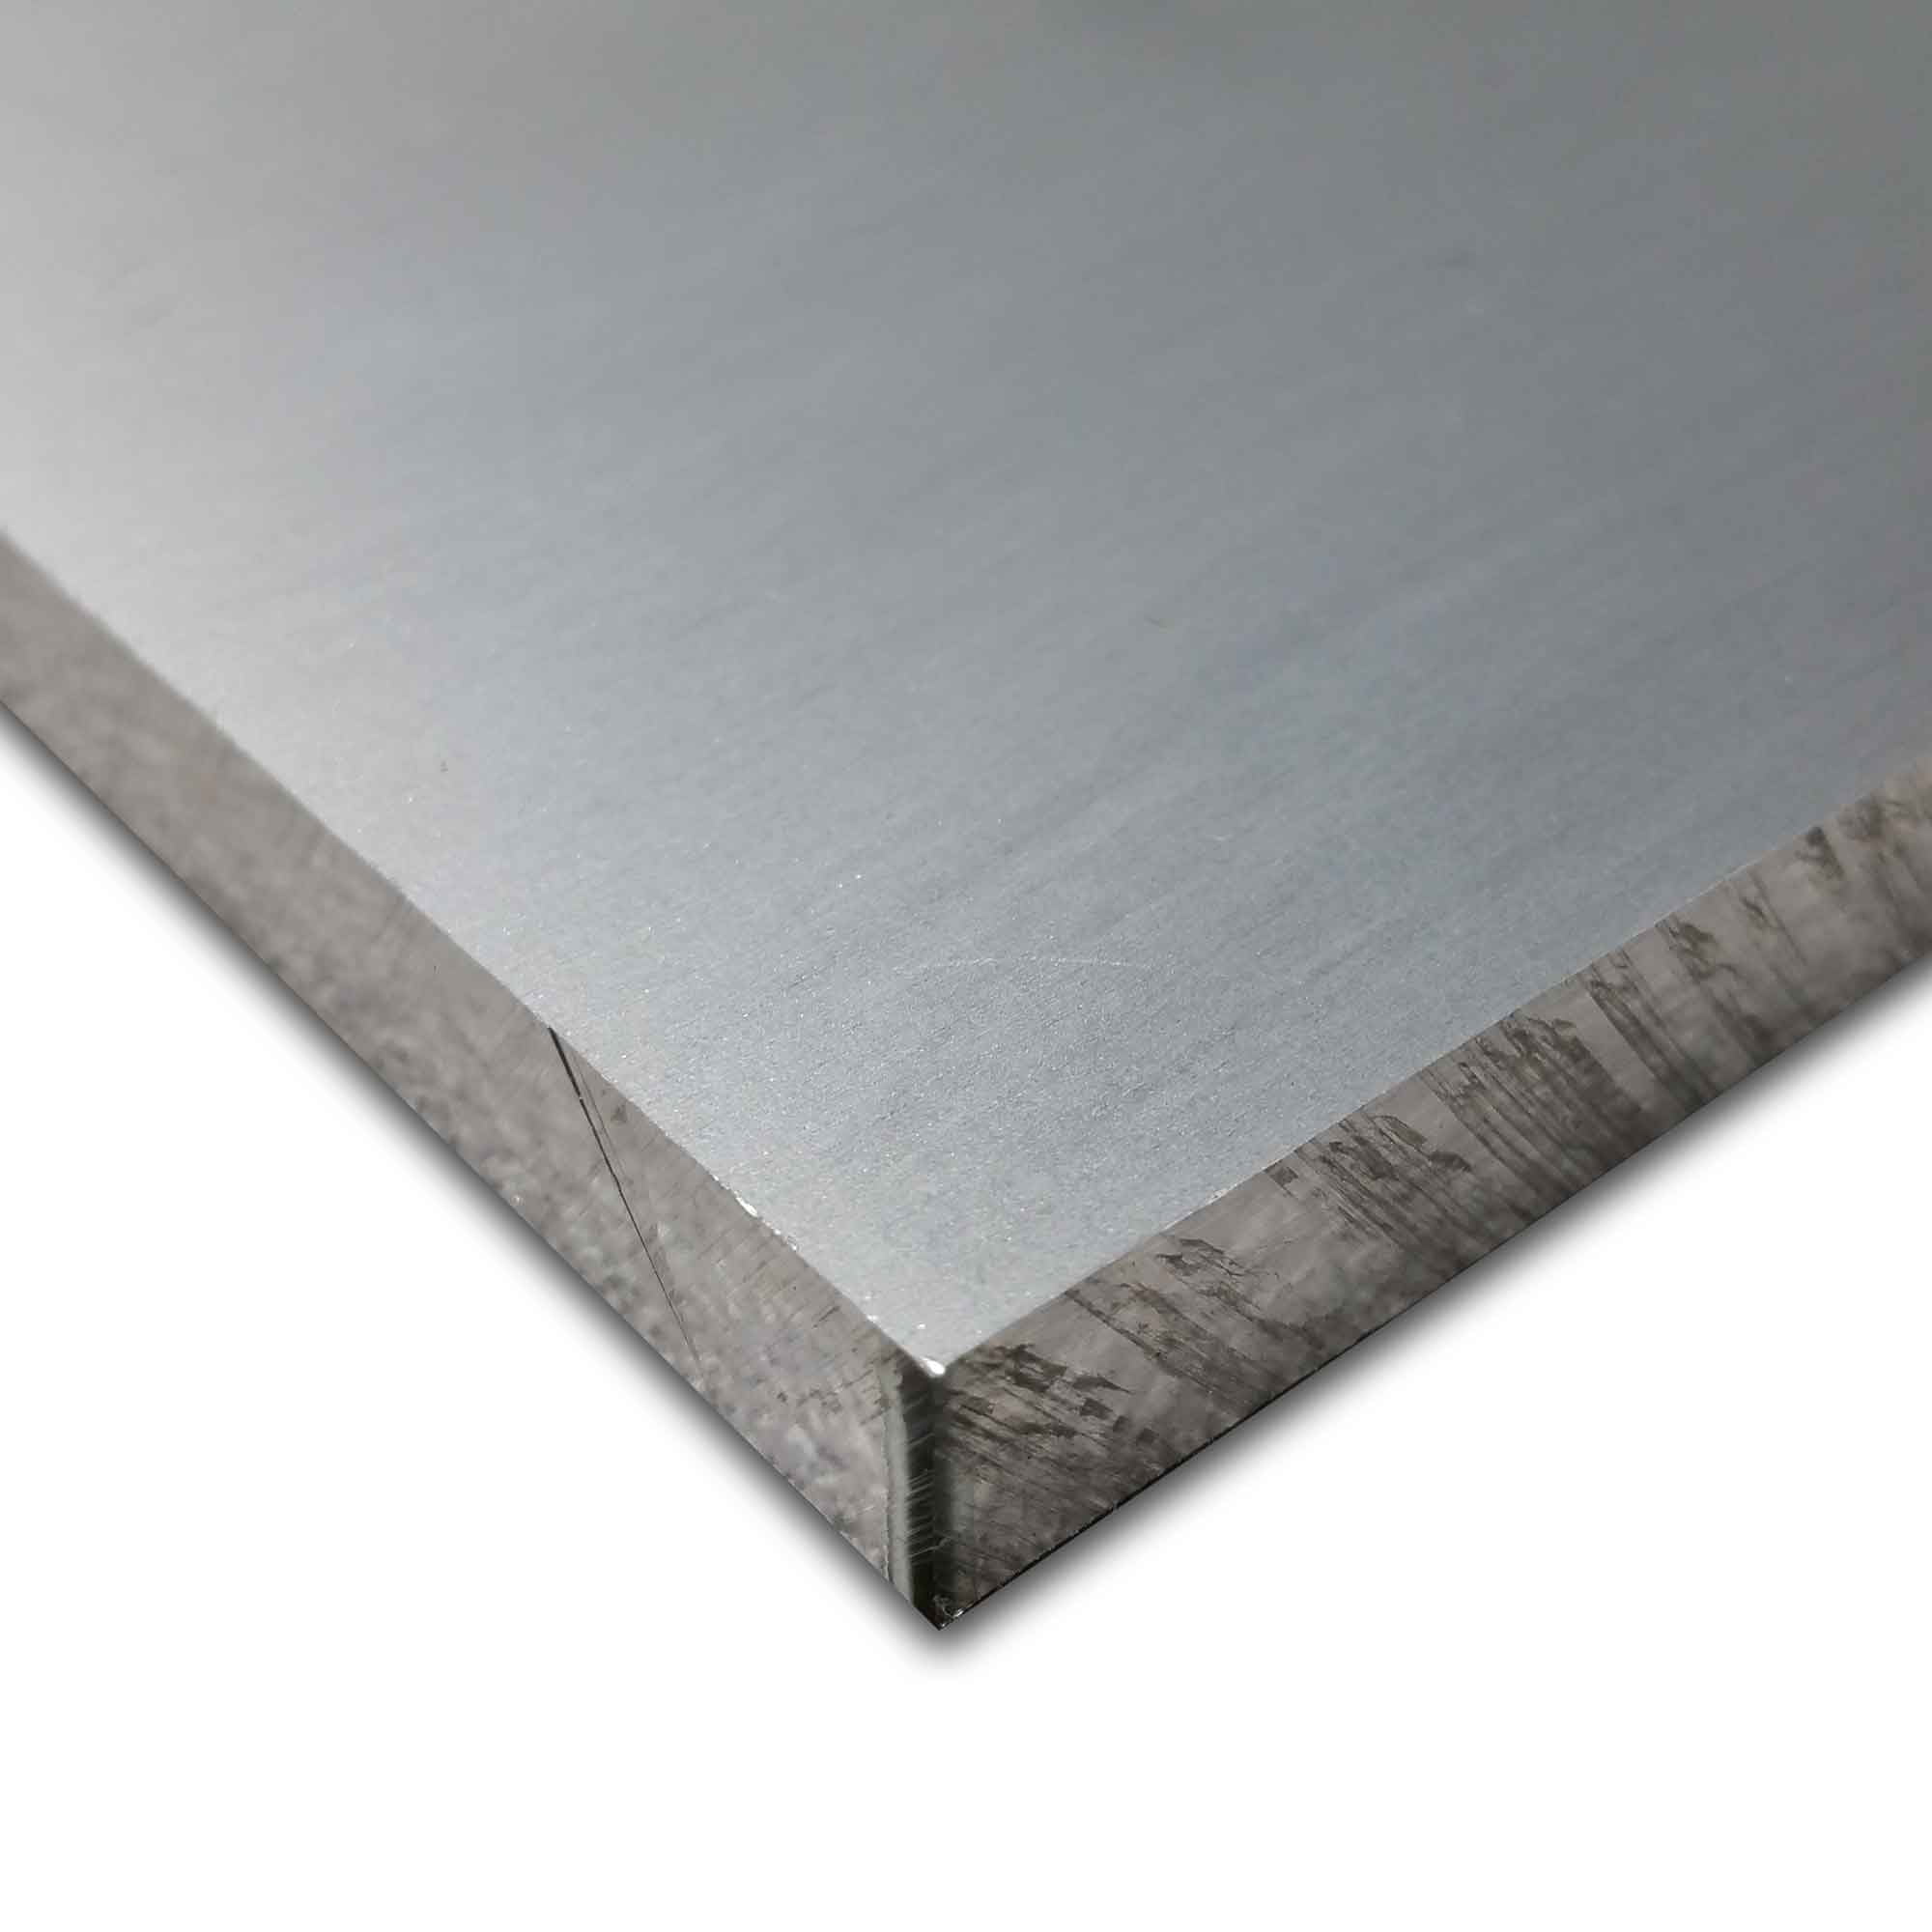 3003H32 Aluminum Plate, Thickness 0.250 (1/4 inch), Width 4 inches, Length 18 inches